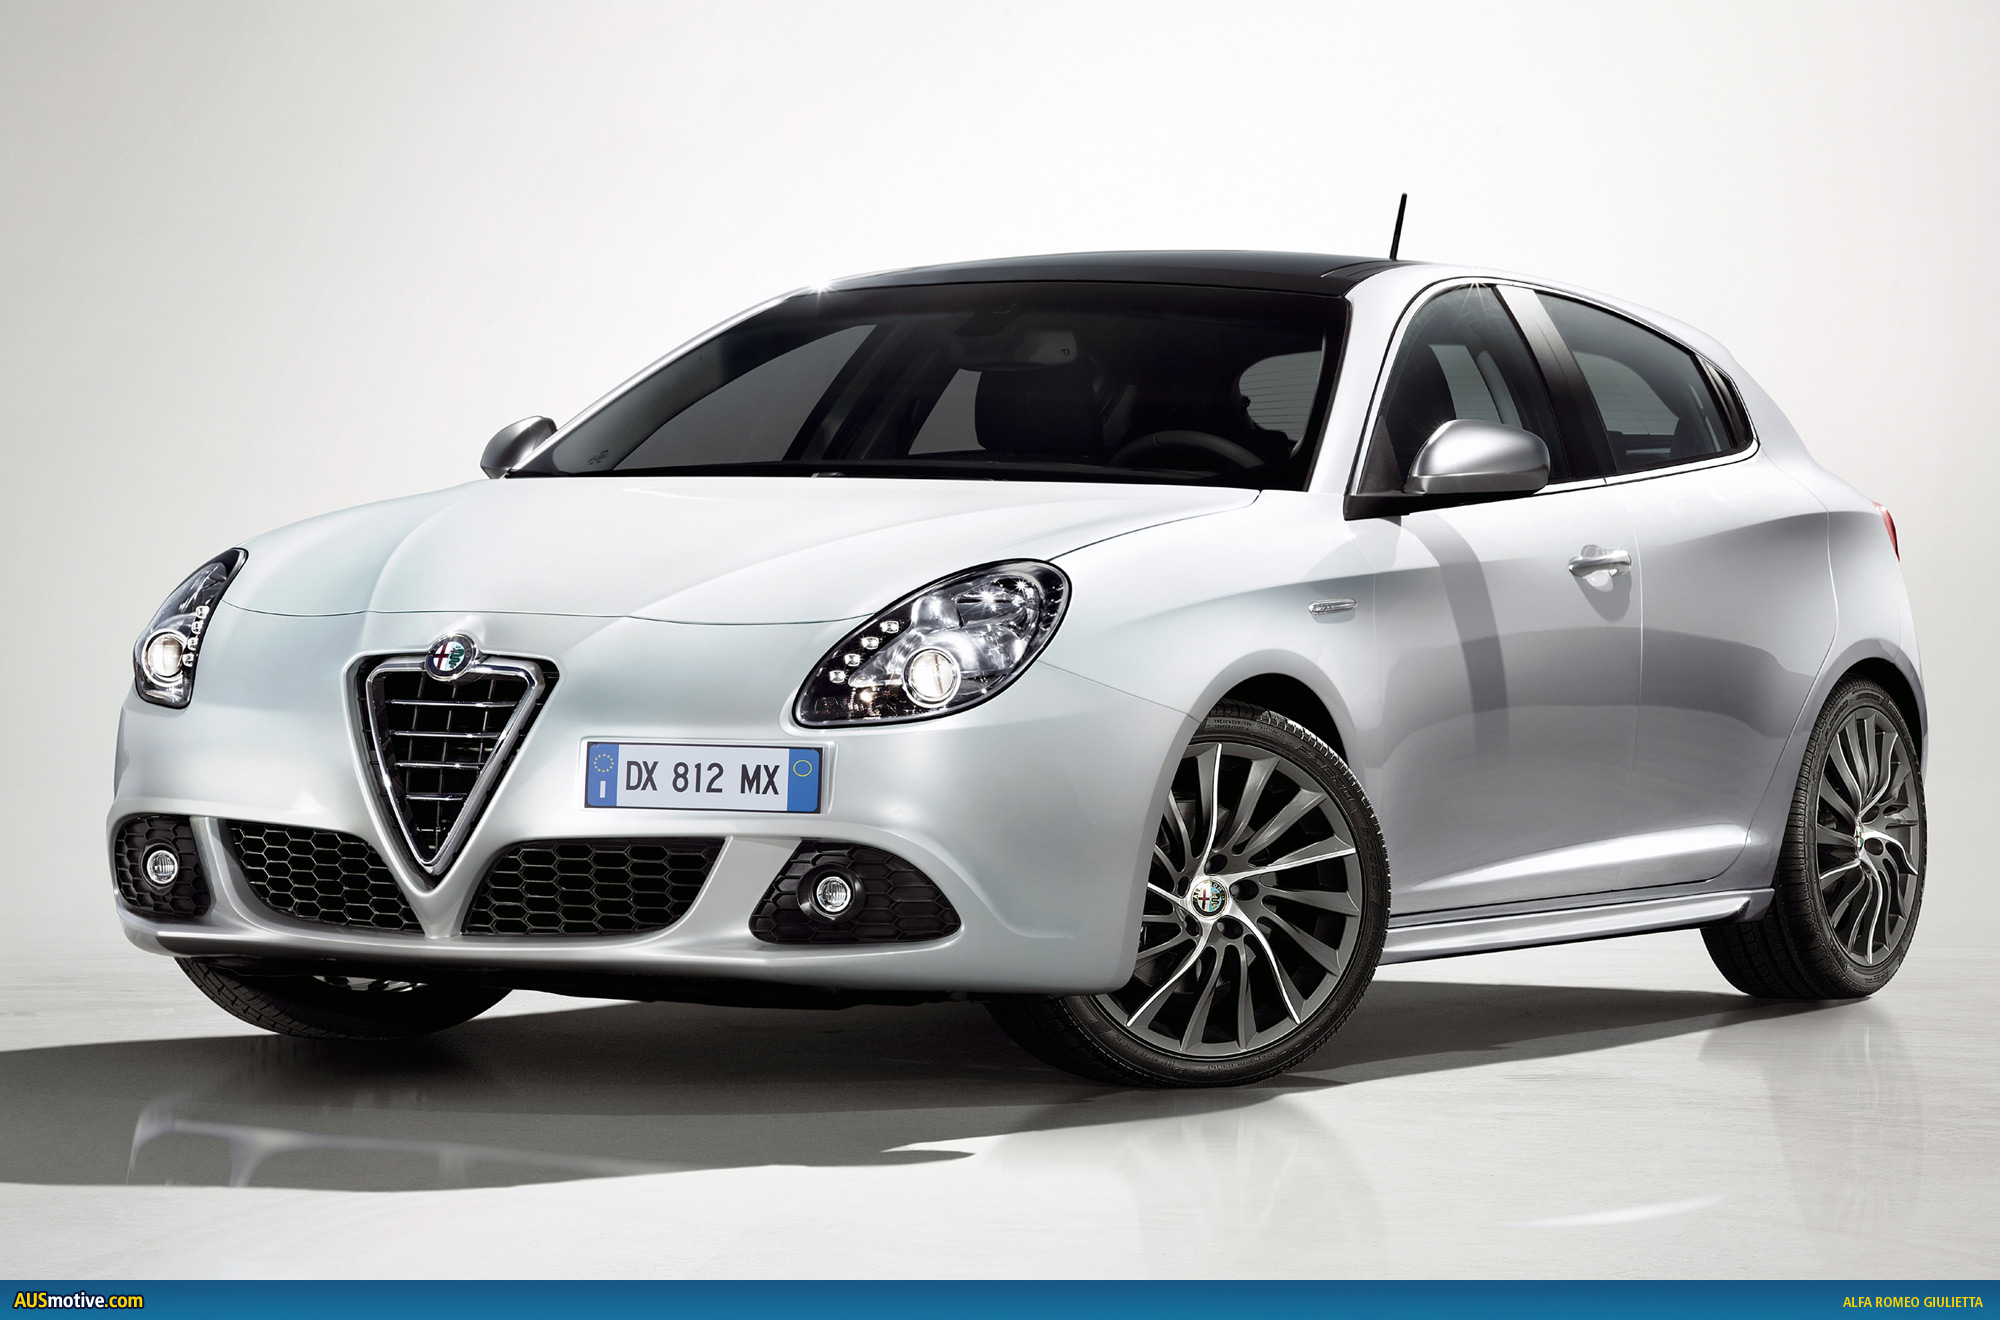 The Alfa Romeo Giulietta is the latest model to be previewed ahead of next